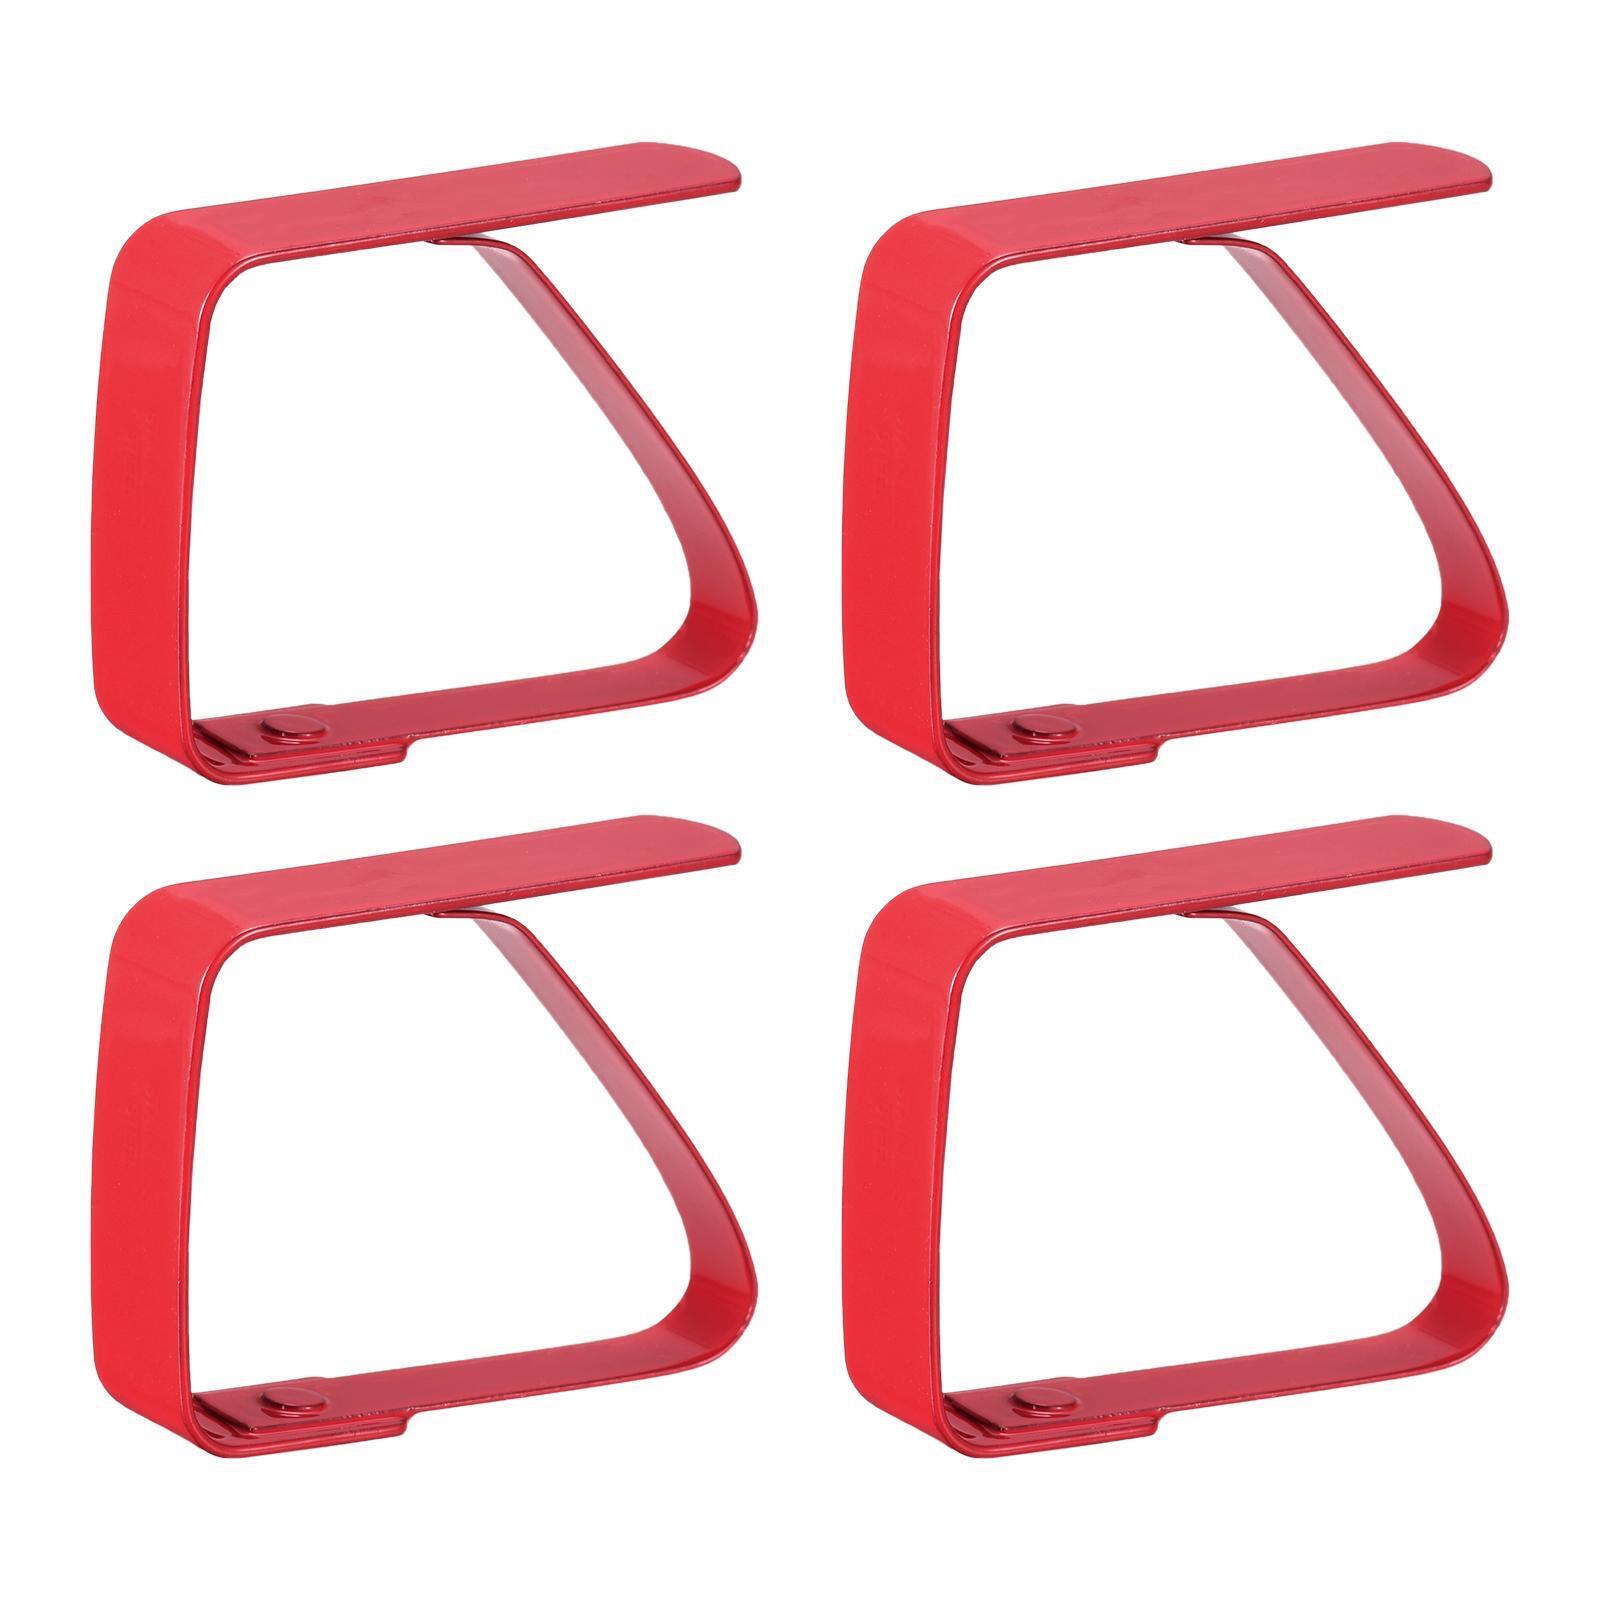 Tablecloth Clips 50mm X 40mm 420 Stainless Steel Table Cloth Holder Red 4 Pcs